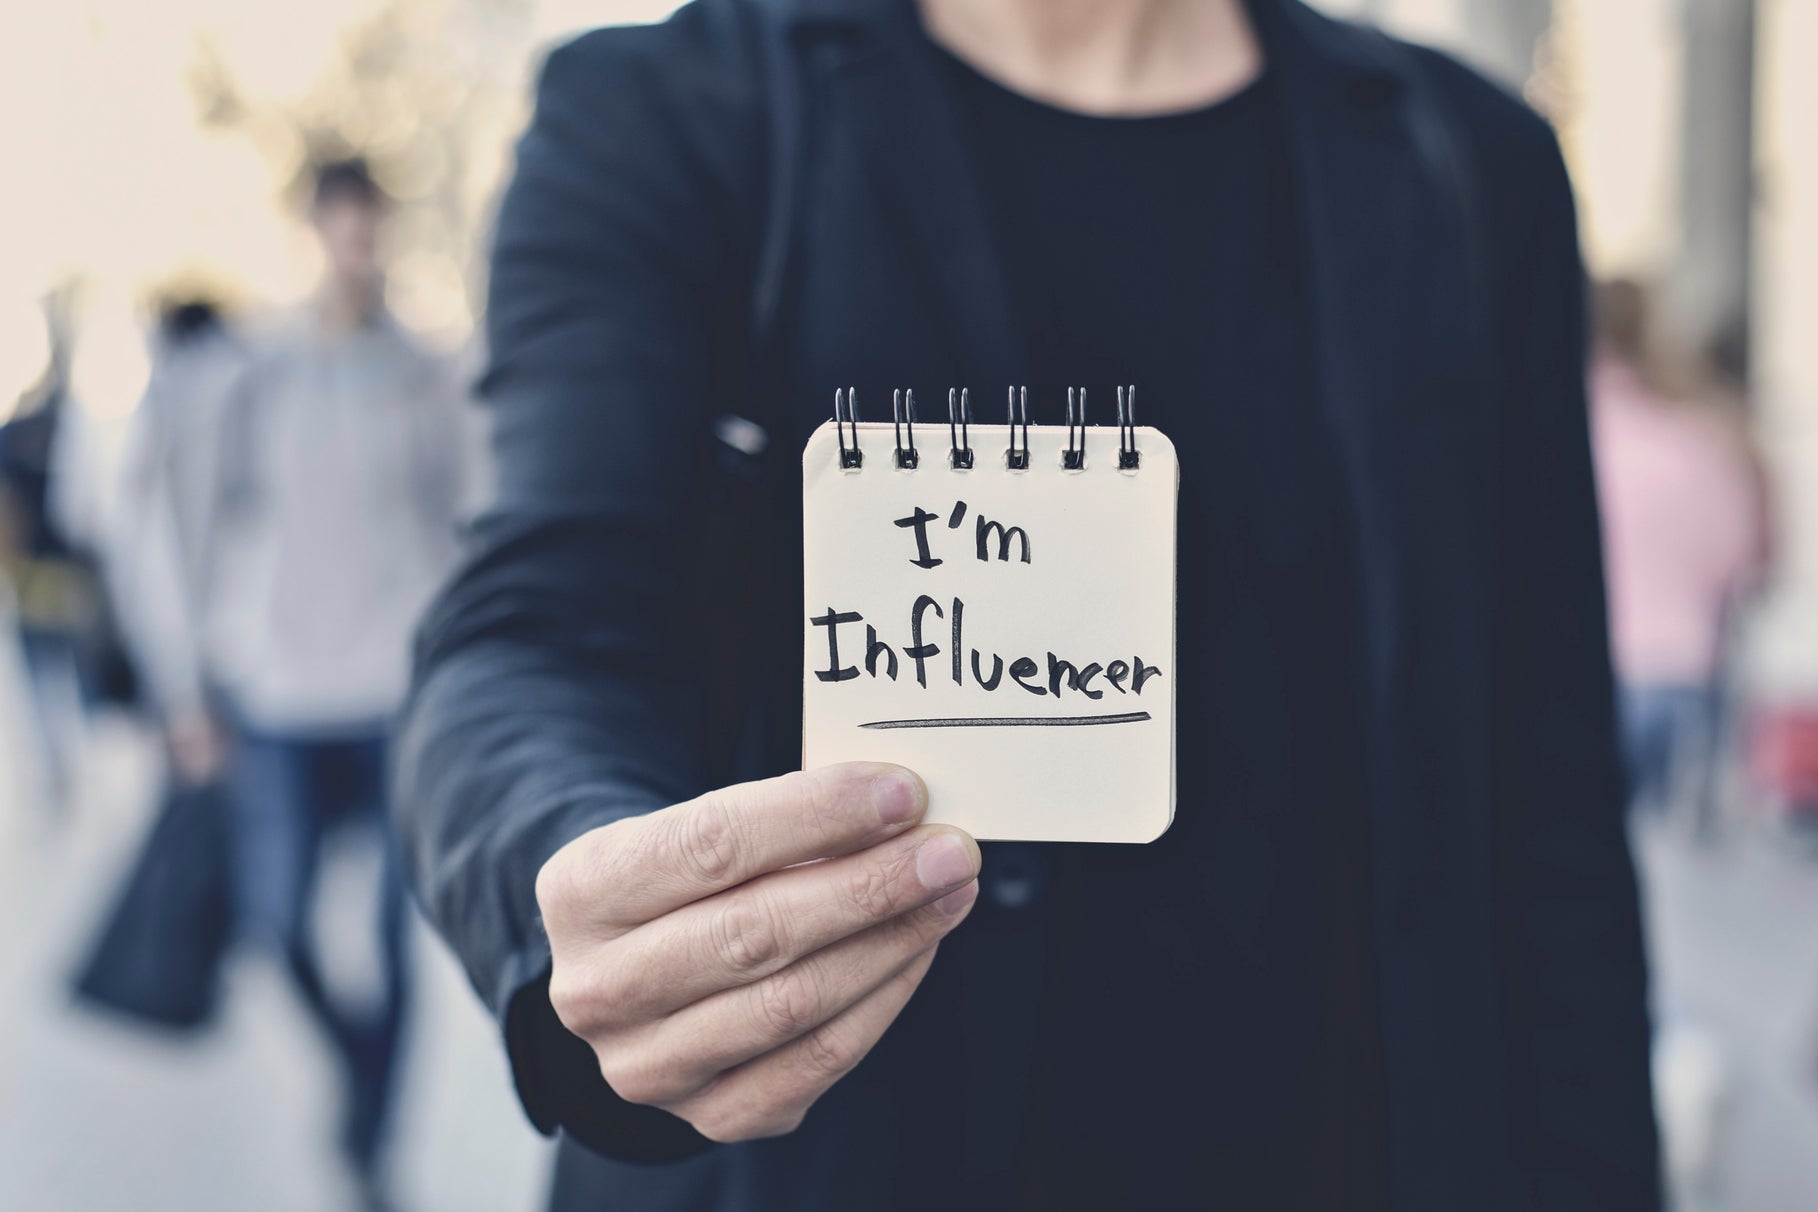 A young Caucasian man holds a name tag that says, "I am Influencer."